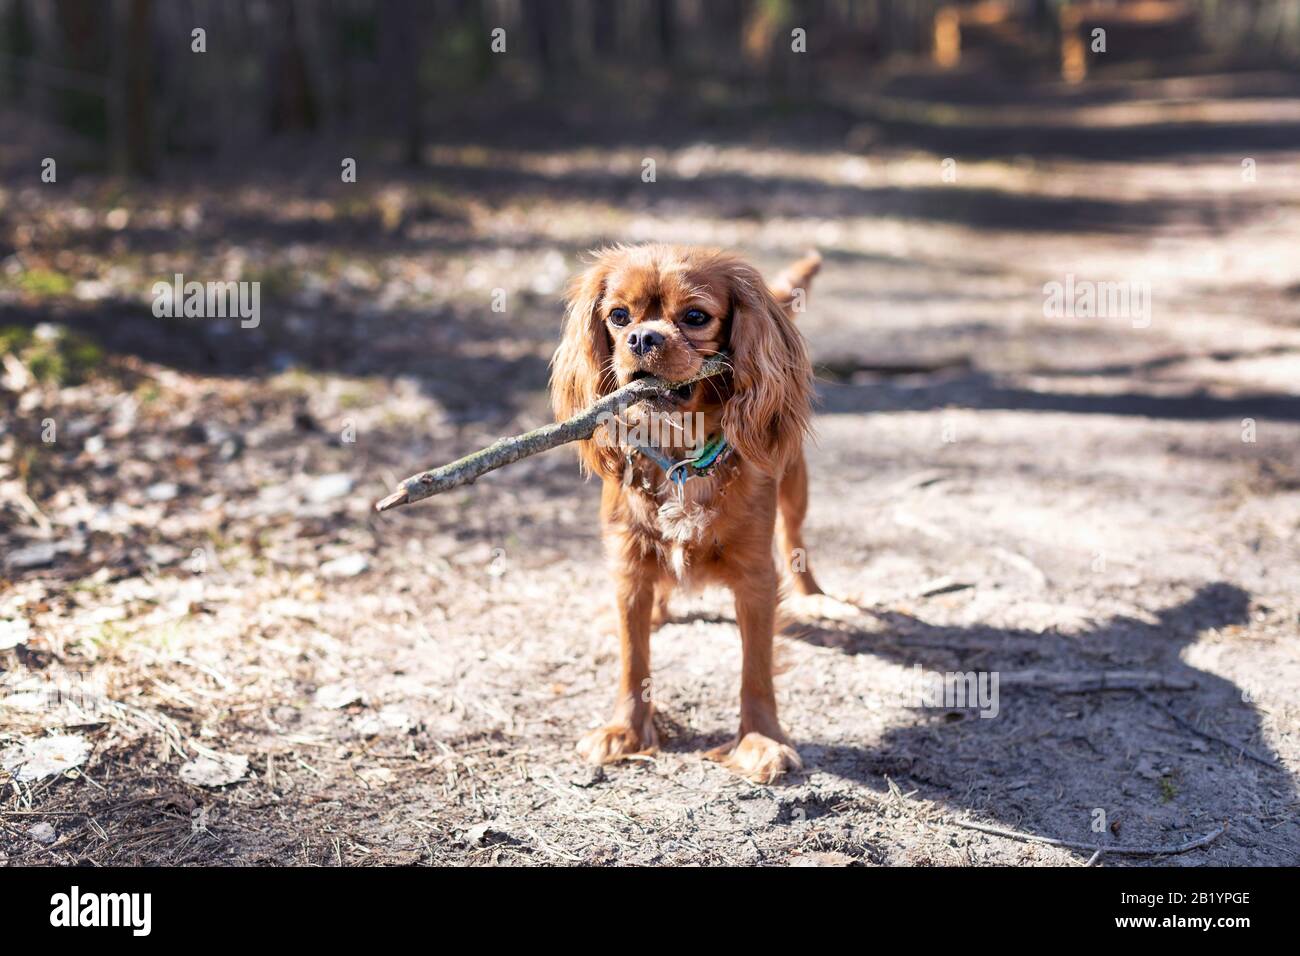 Playful brown dog with stick in mouth Stock Photo